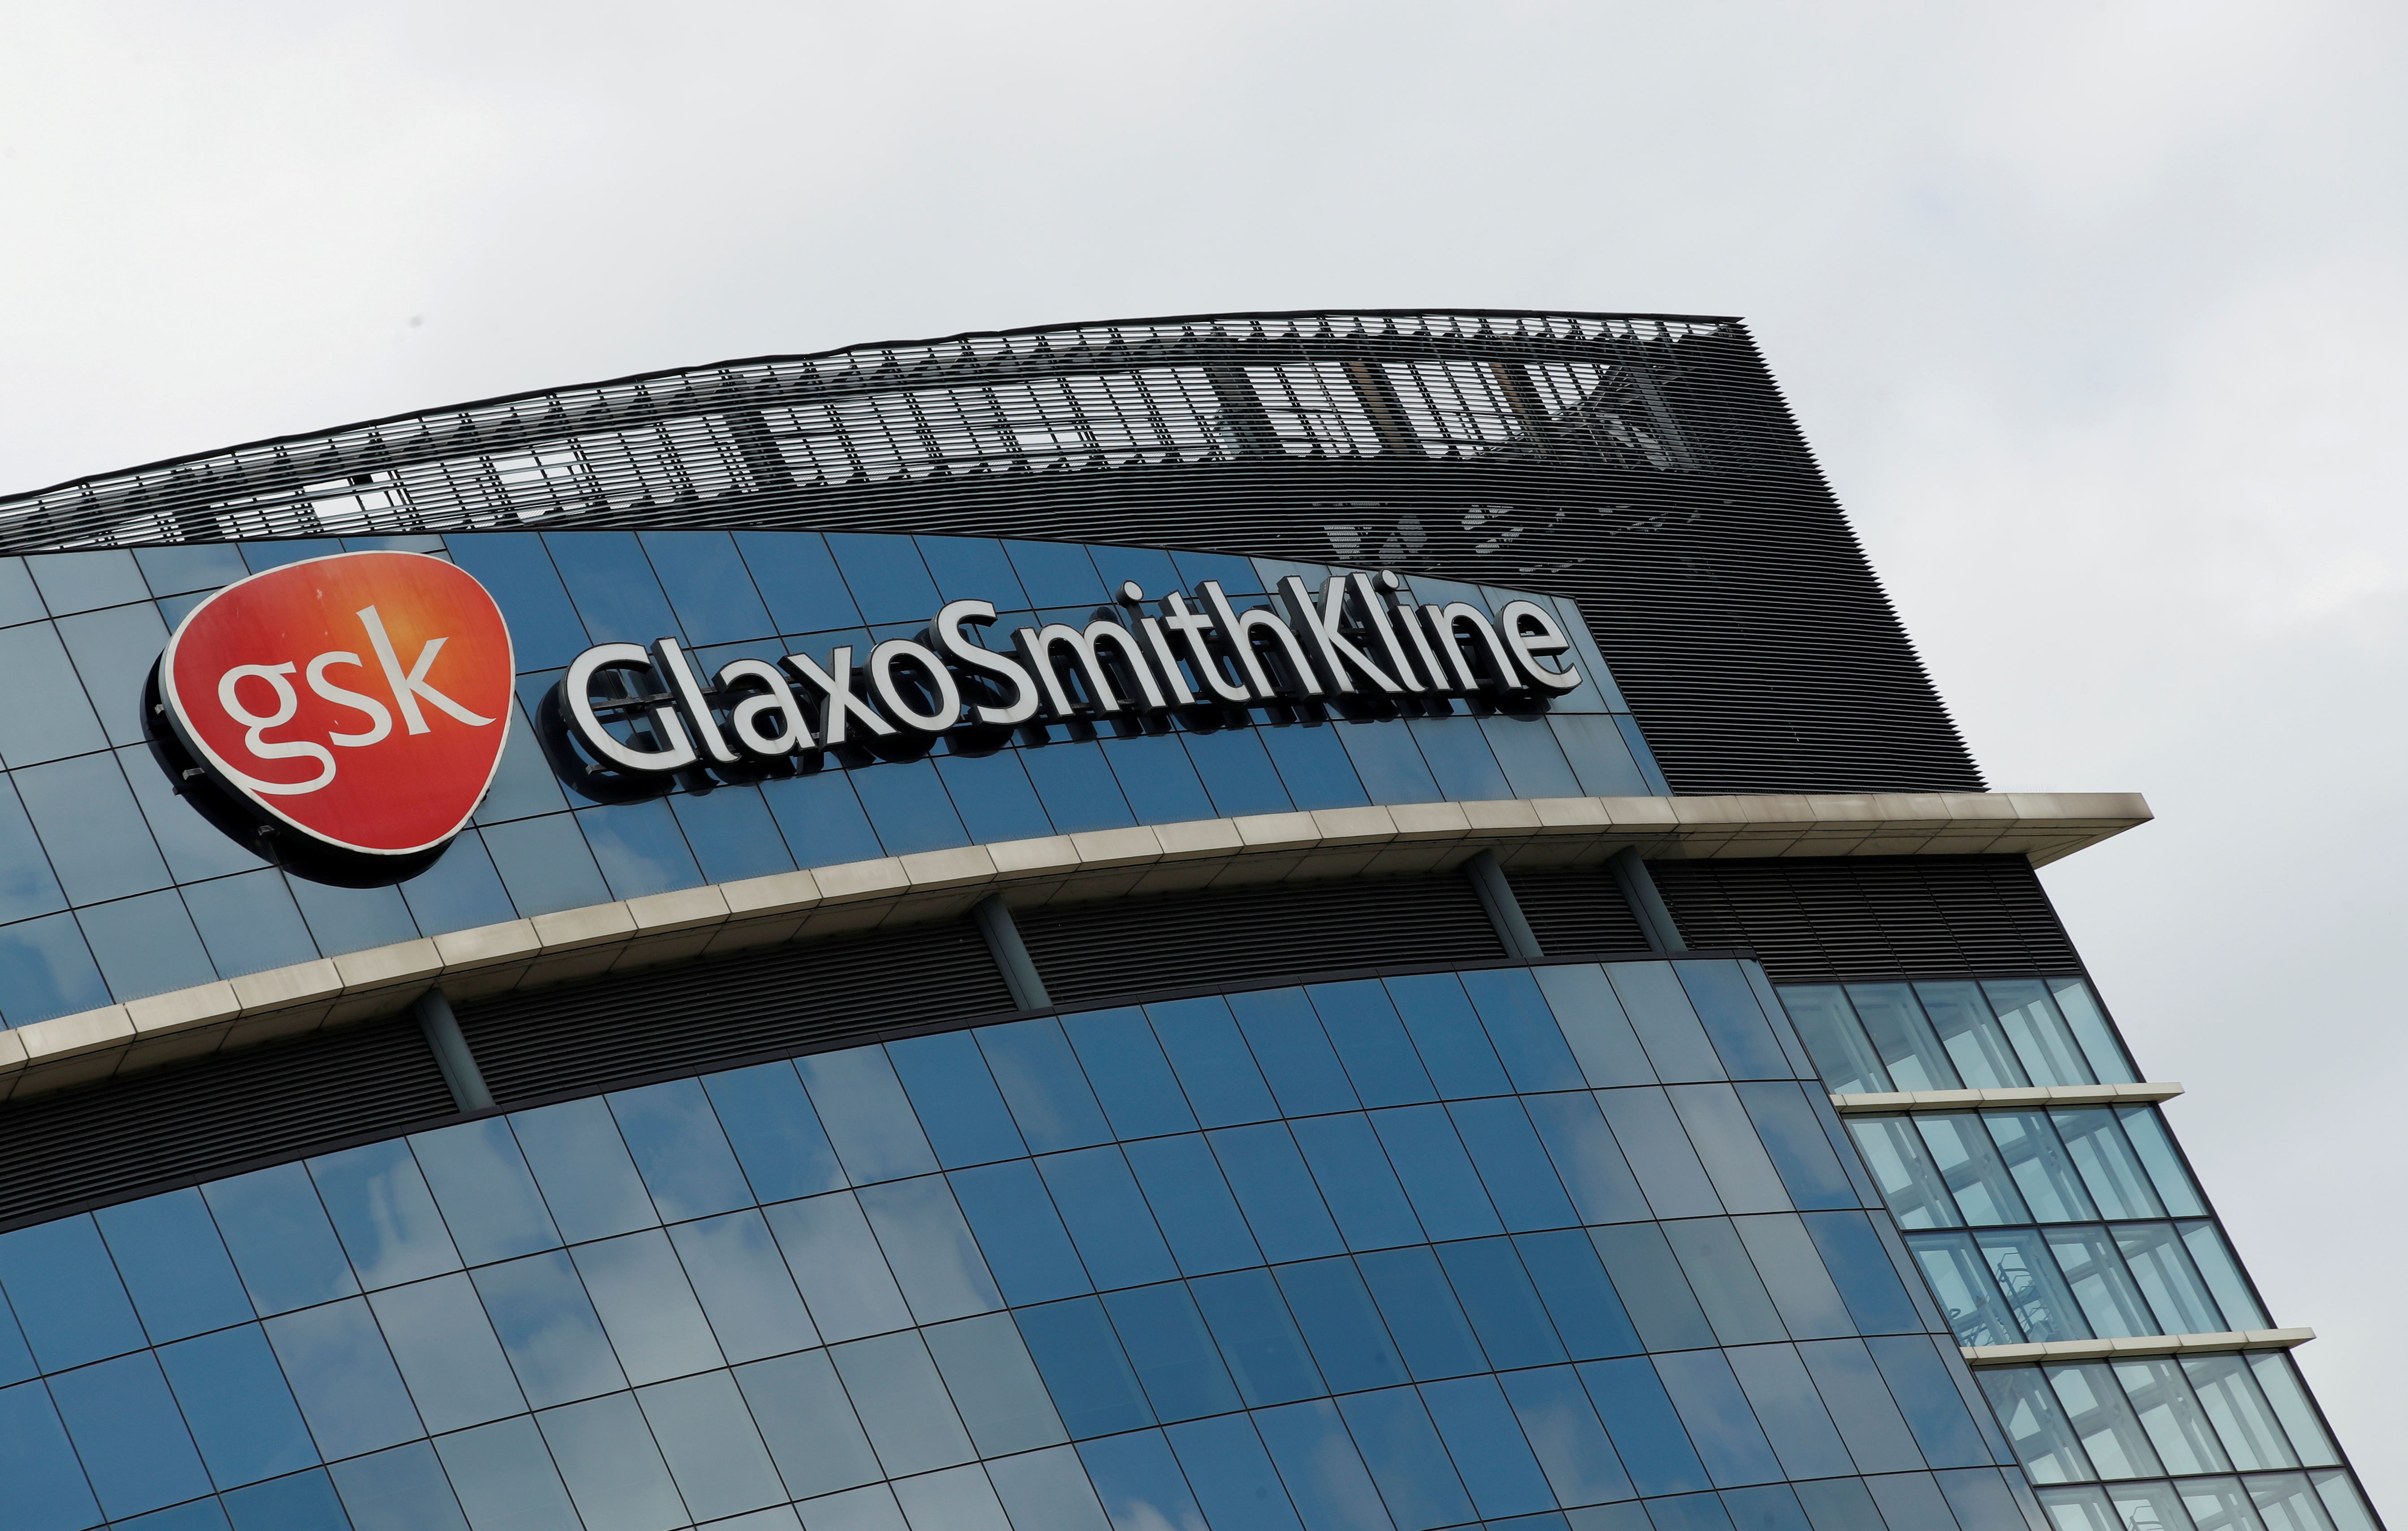 General view outside GlaxoSmithKline (GSK) headquarters in Brentford, London, Britain, May 4, 2020. REUTERS/Matthew Childs